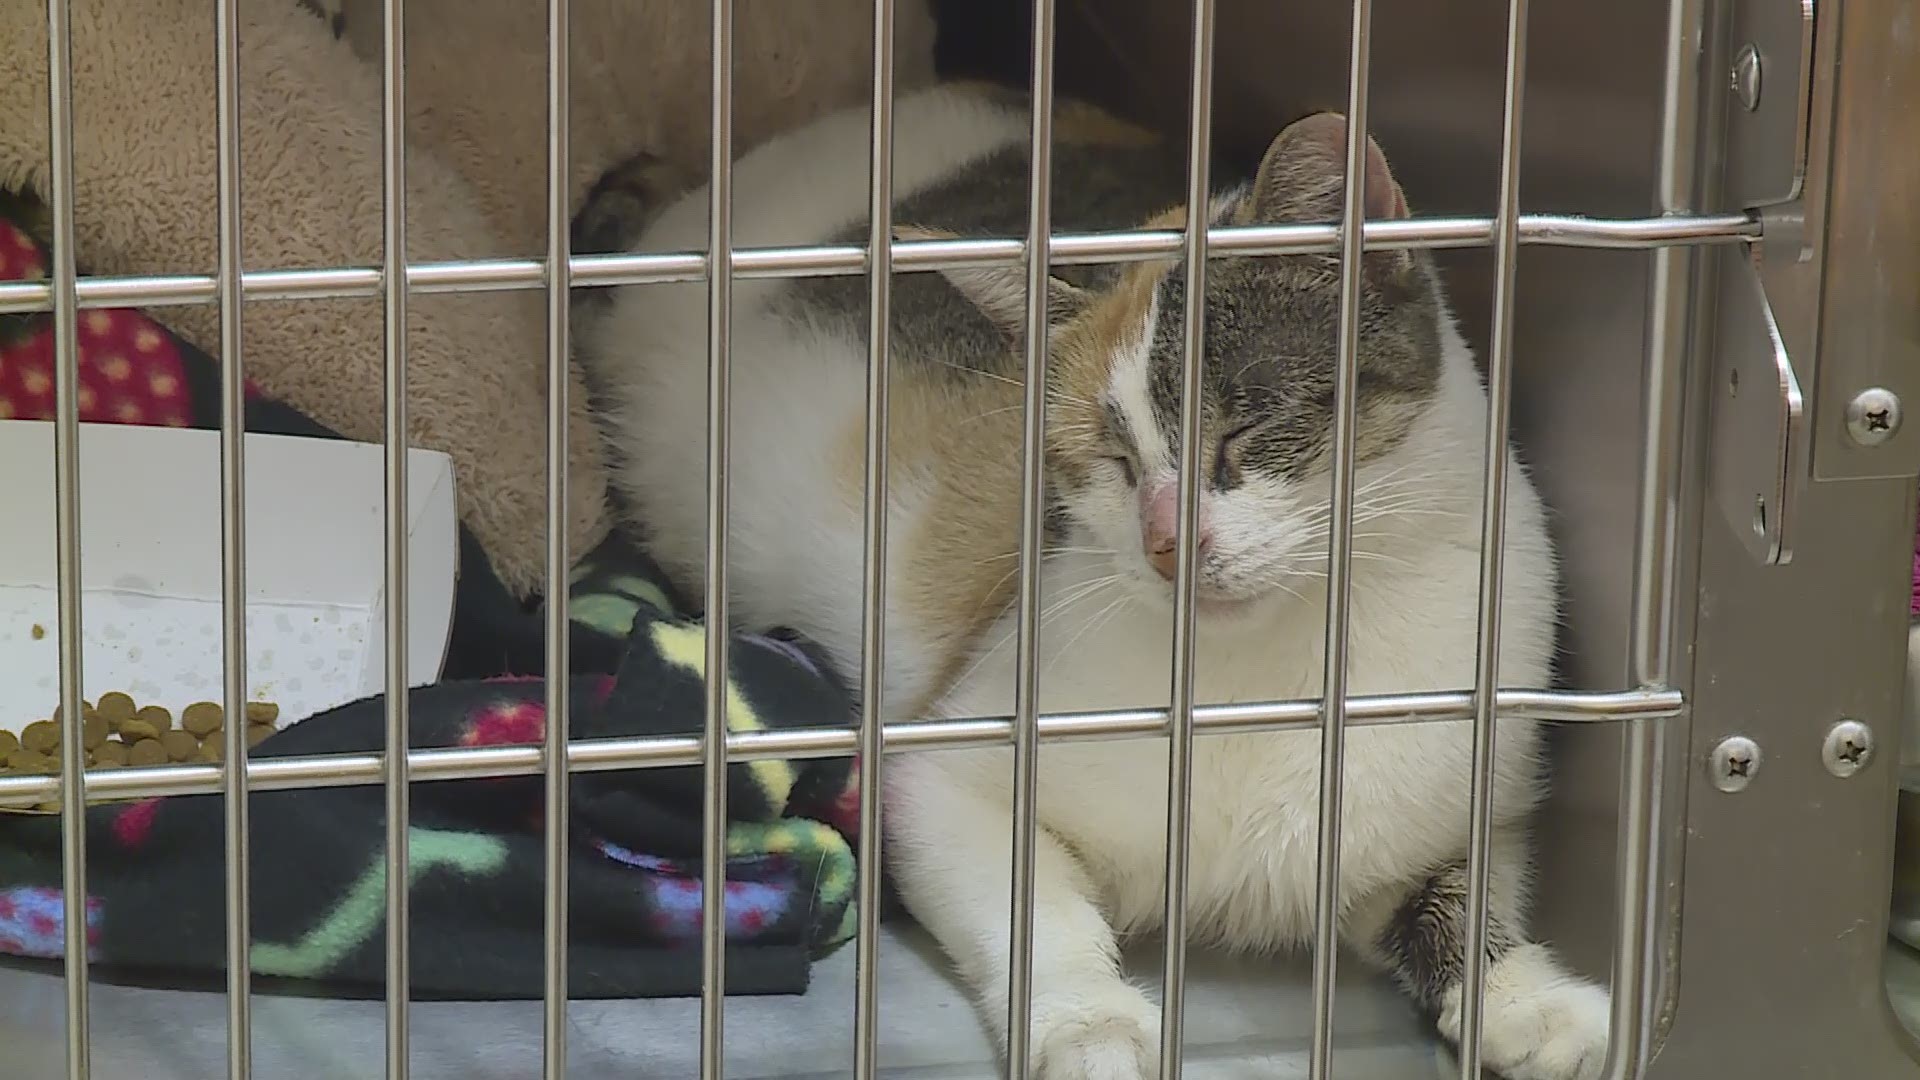 3News was granted a look inside VCA Great Lakes Veterinary Specialists to see the cats who were rescued. Seven were dumped near the trash behind the hospital.